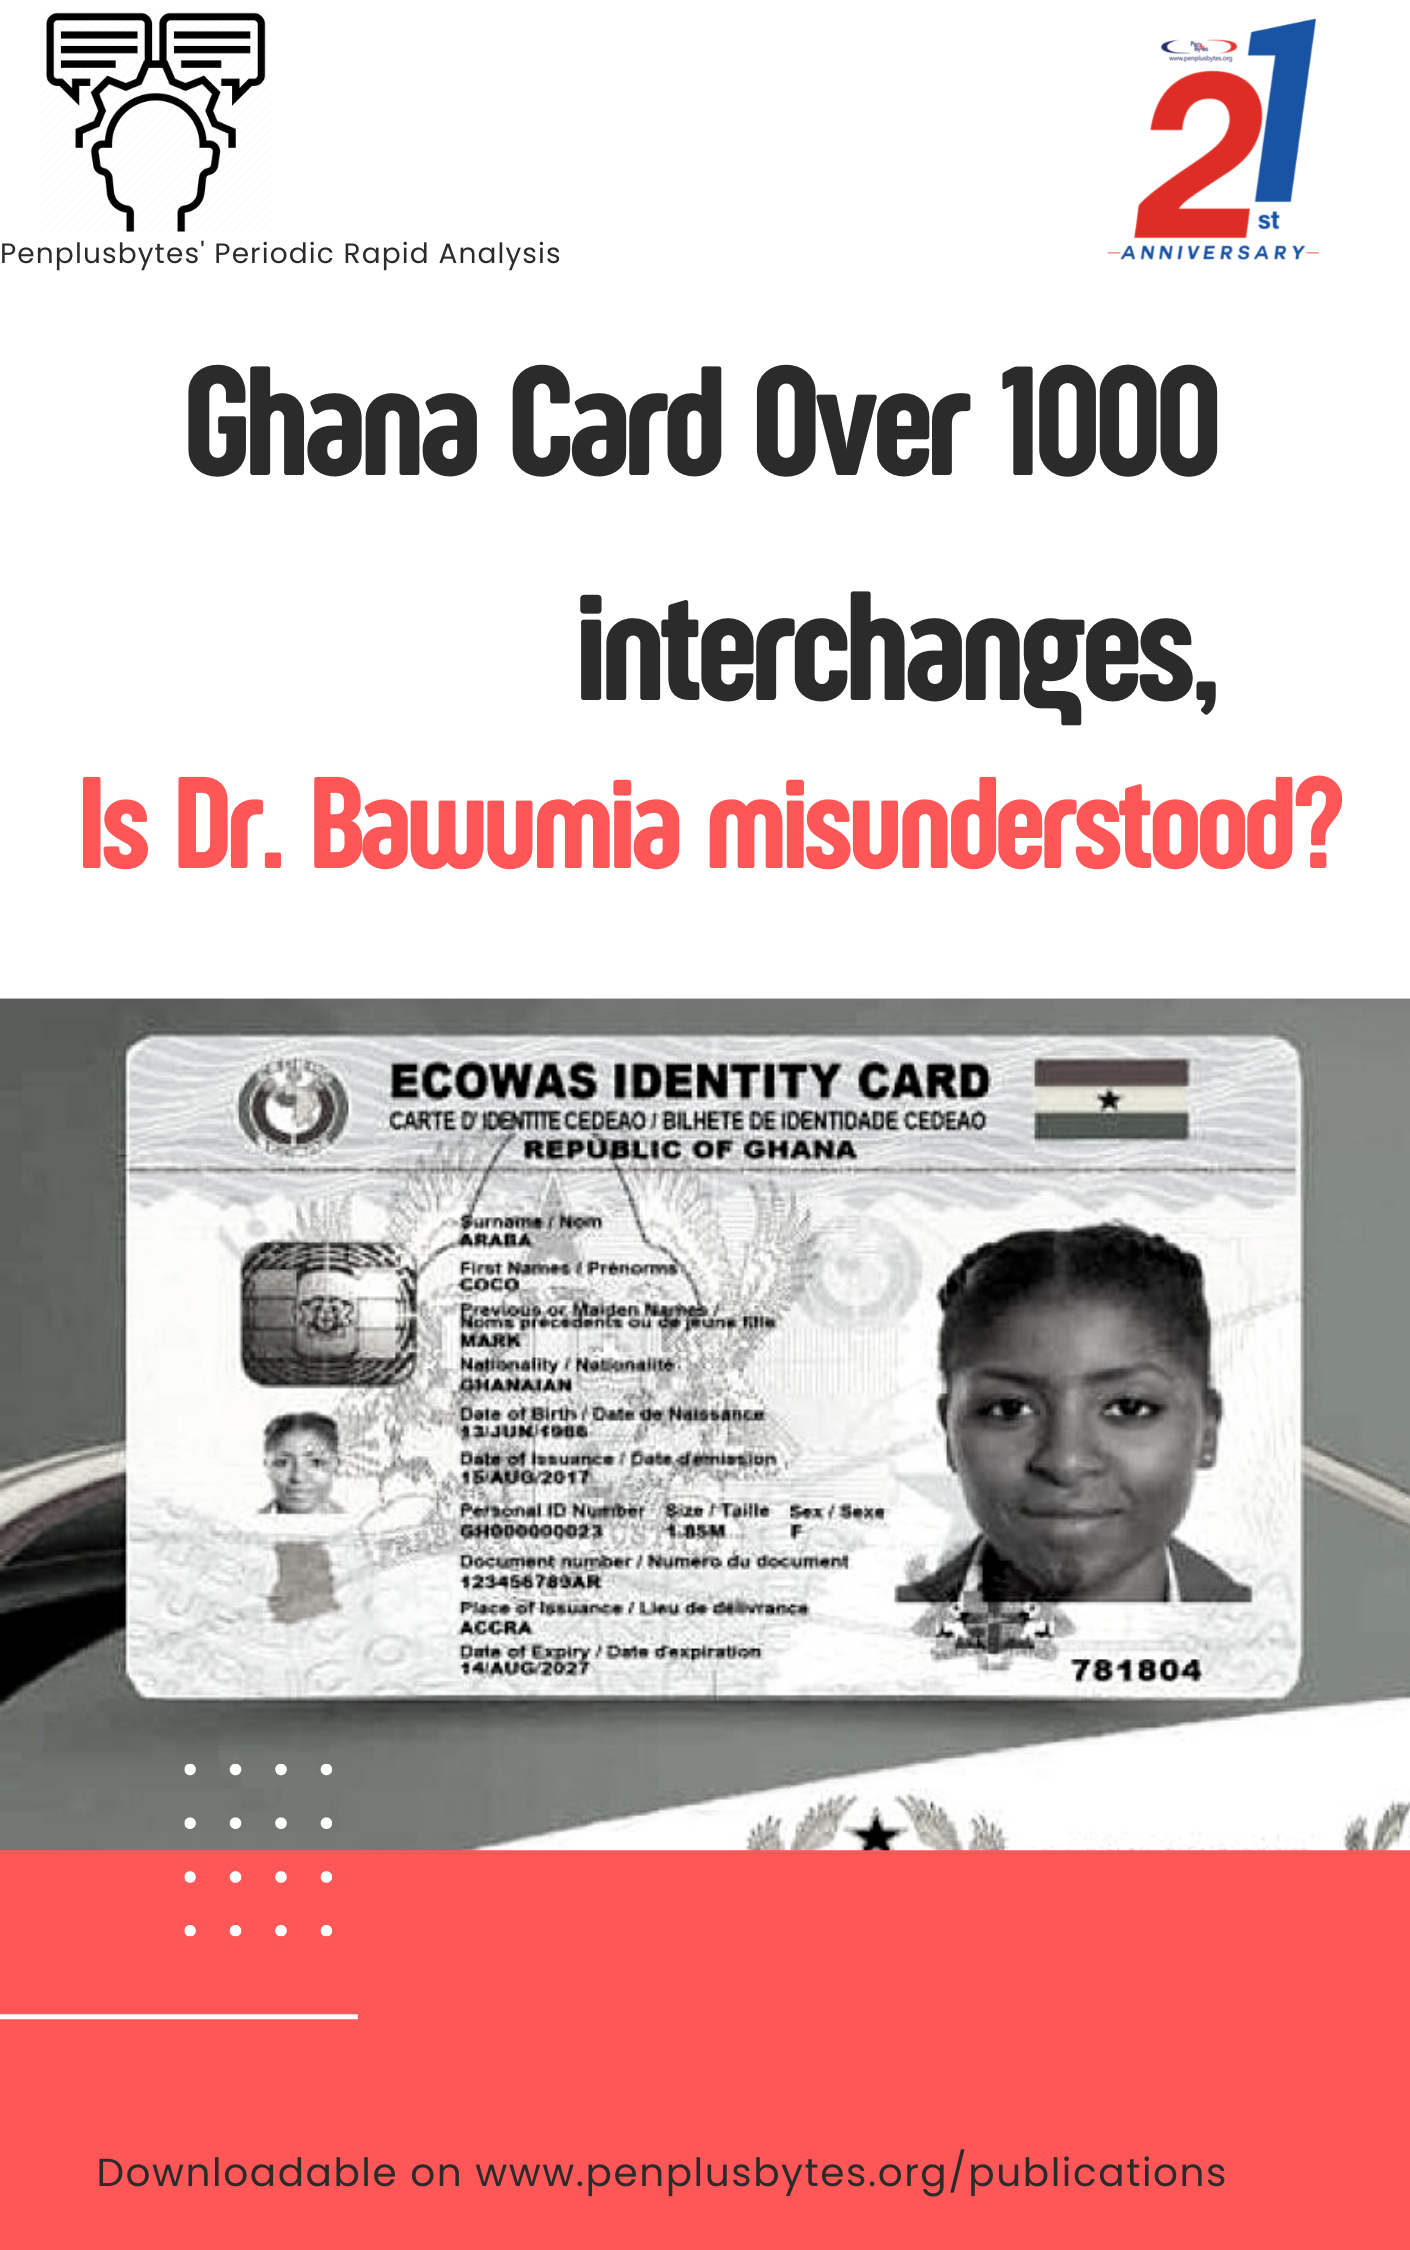 Ghana Card Over 1000 interchanges, Is Dr. Bawumia misunderstood?